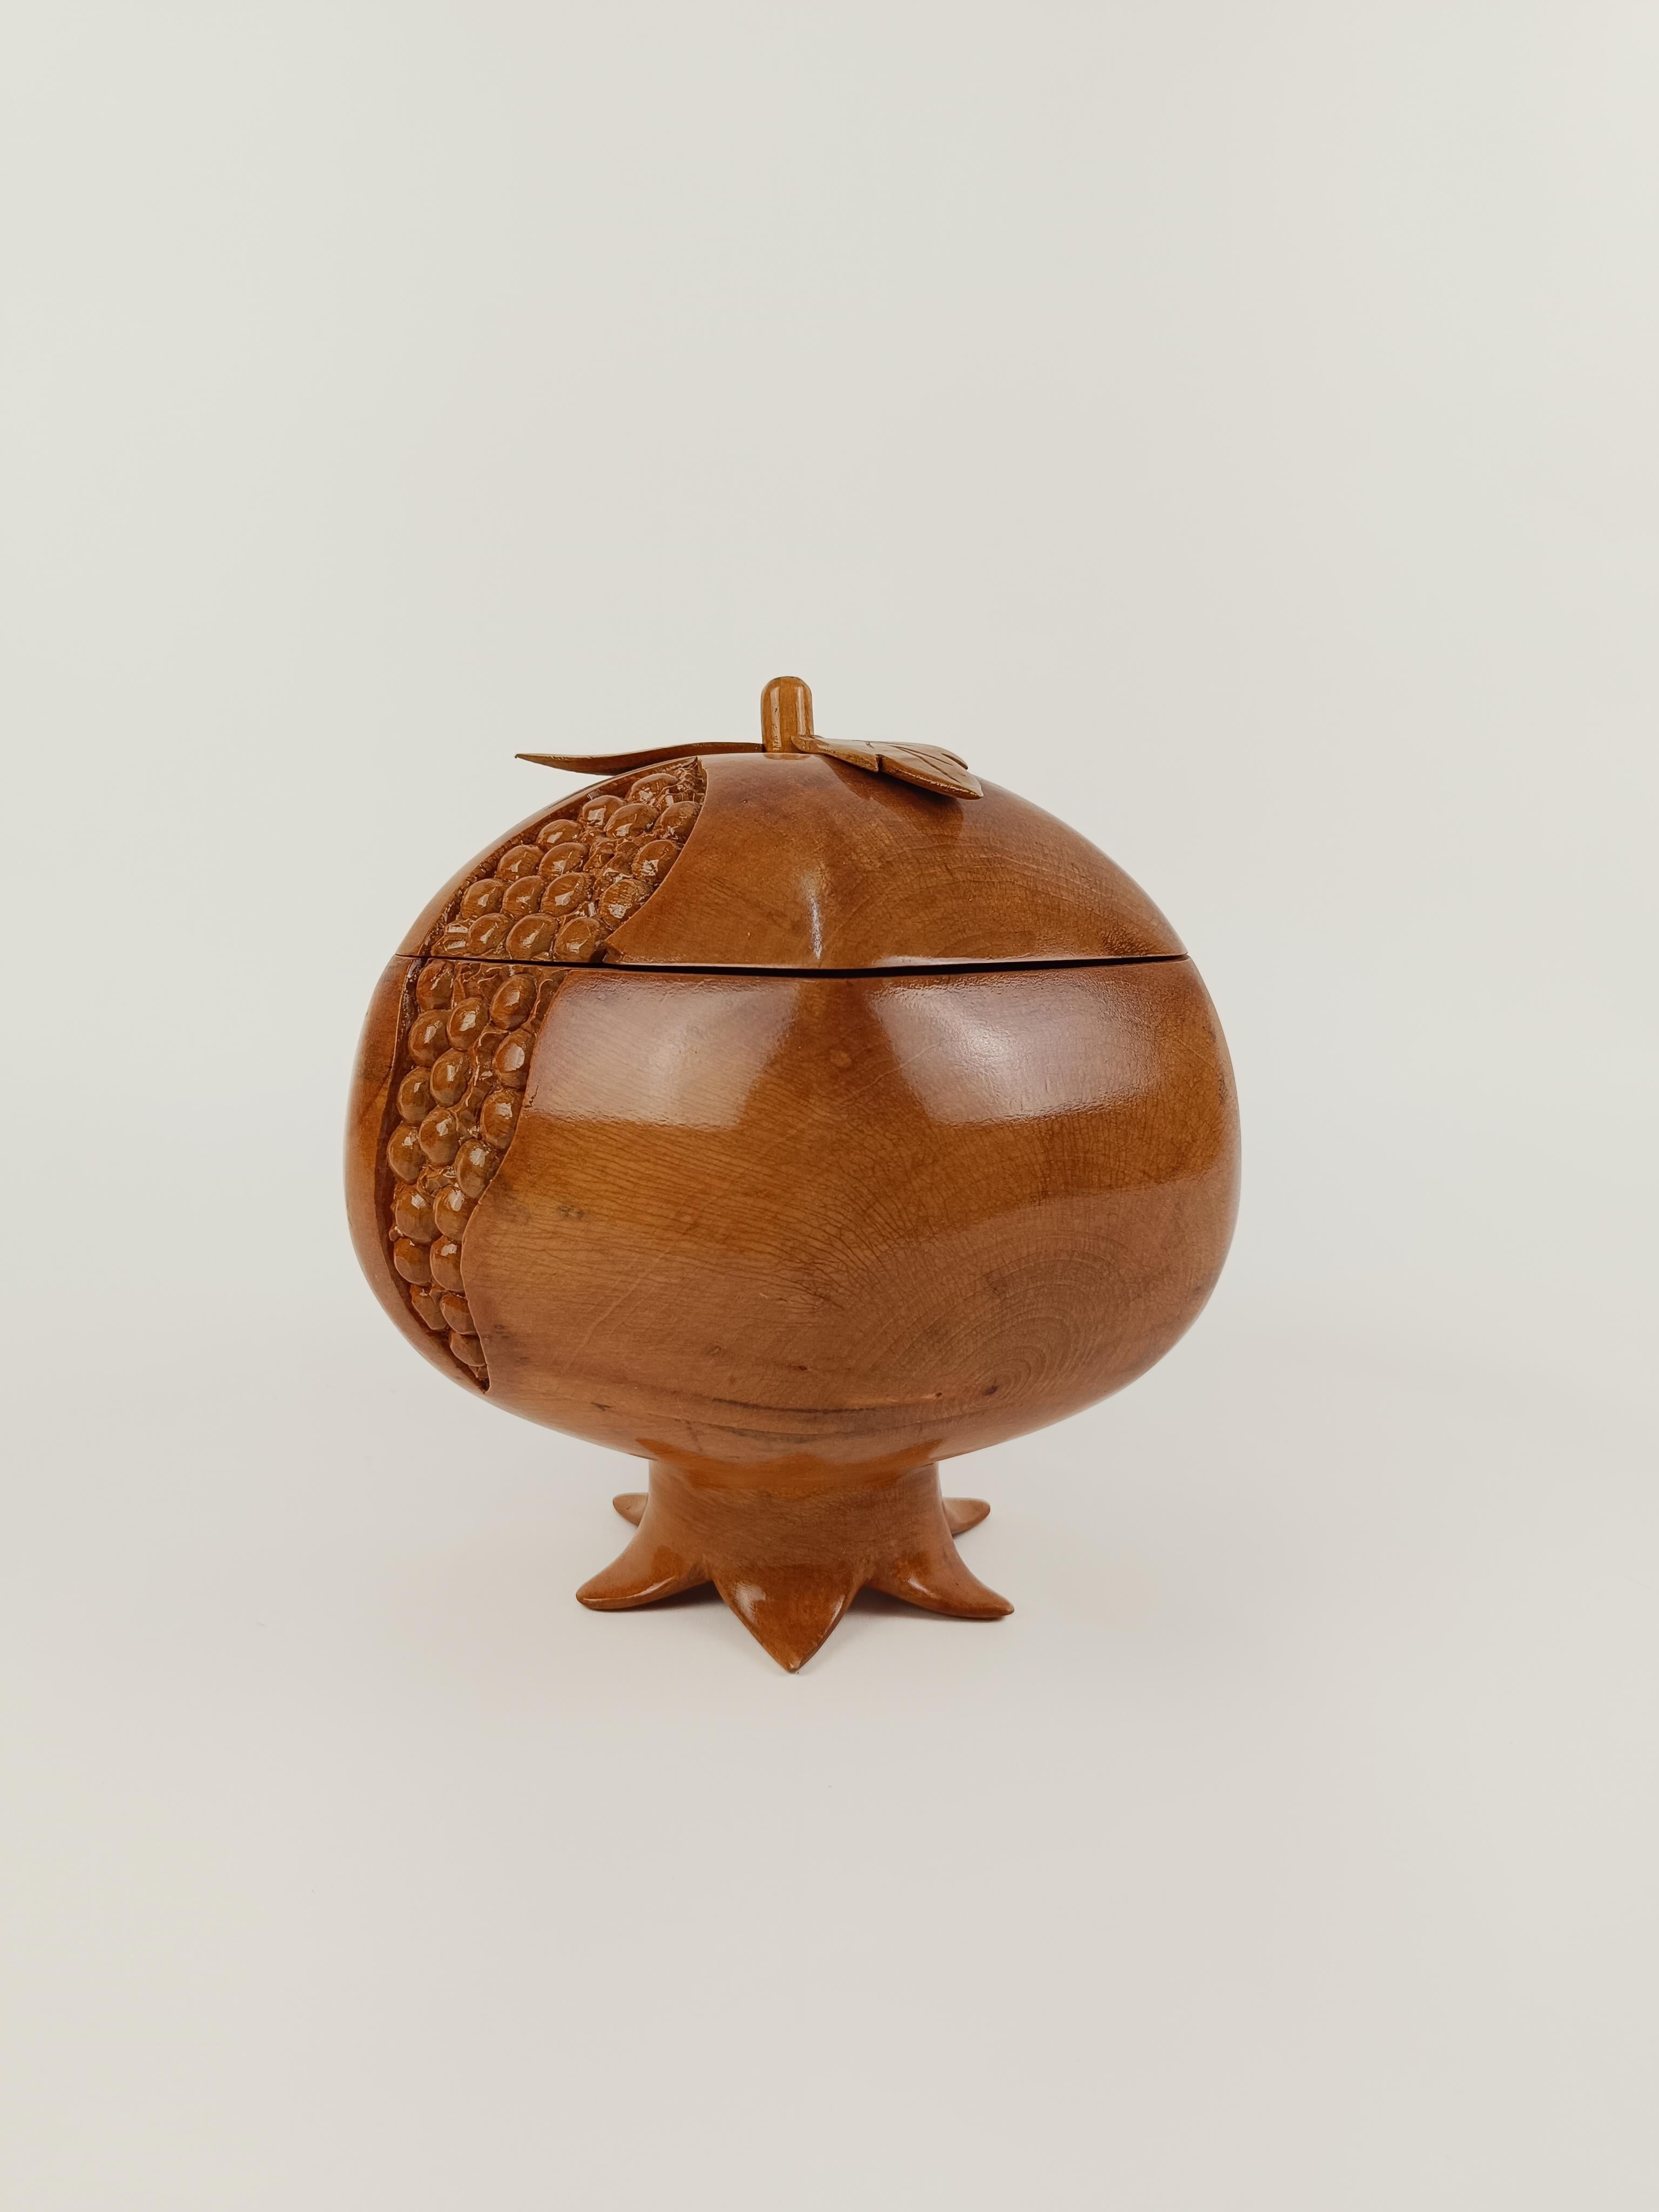 Maple Sculptural Vintage Ice Bucket in maple wood carved in the shape of a pomegranate